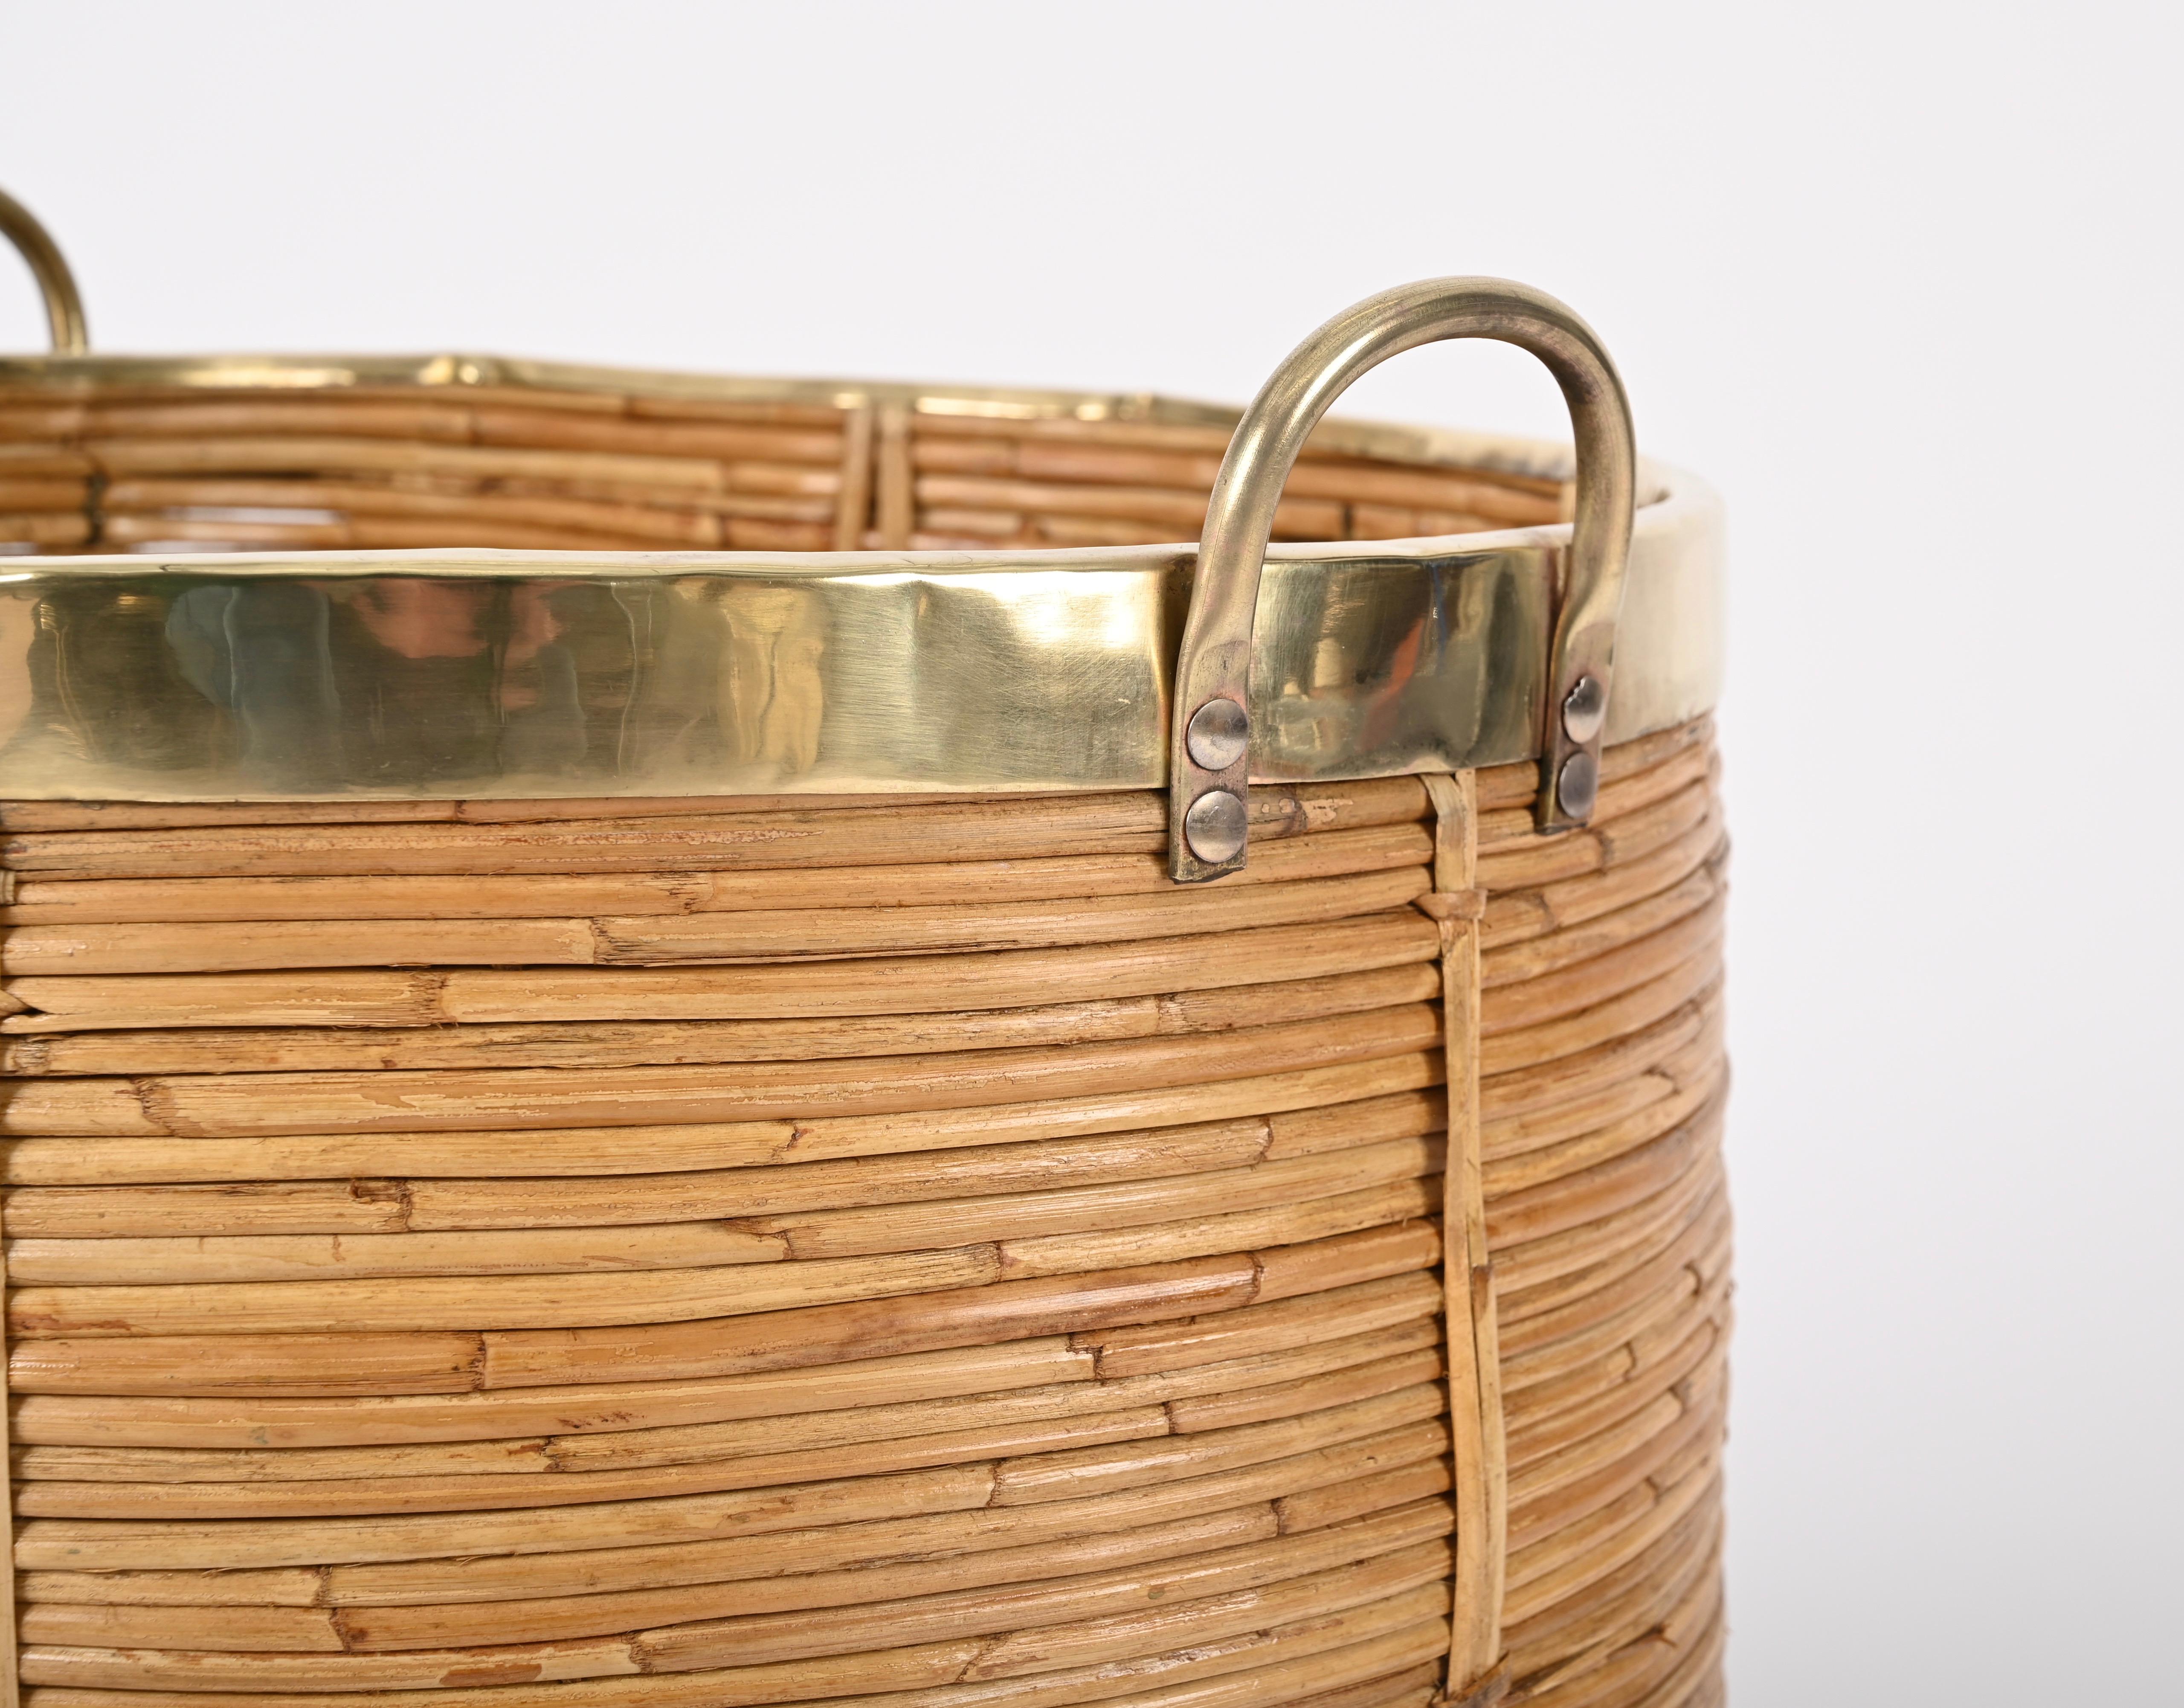 Midcentury Curved Rattan, Brass and Wicker Basket, Vivai del Sud, Italy 1970s For Sale 9